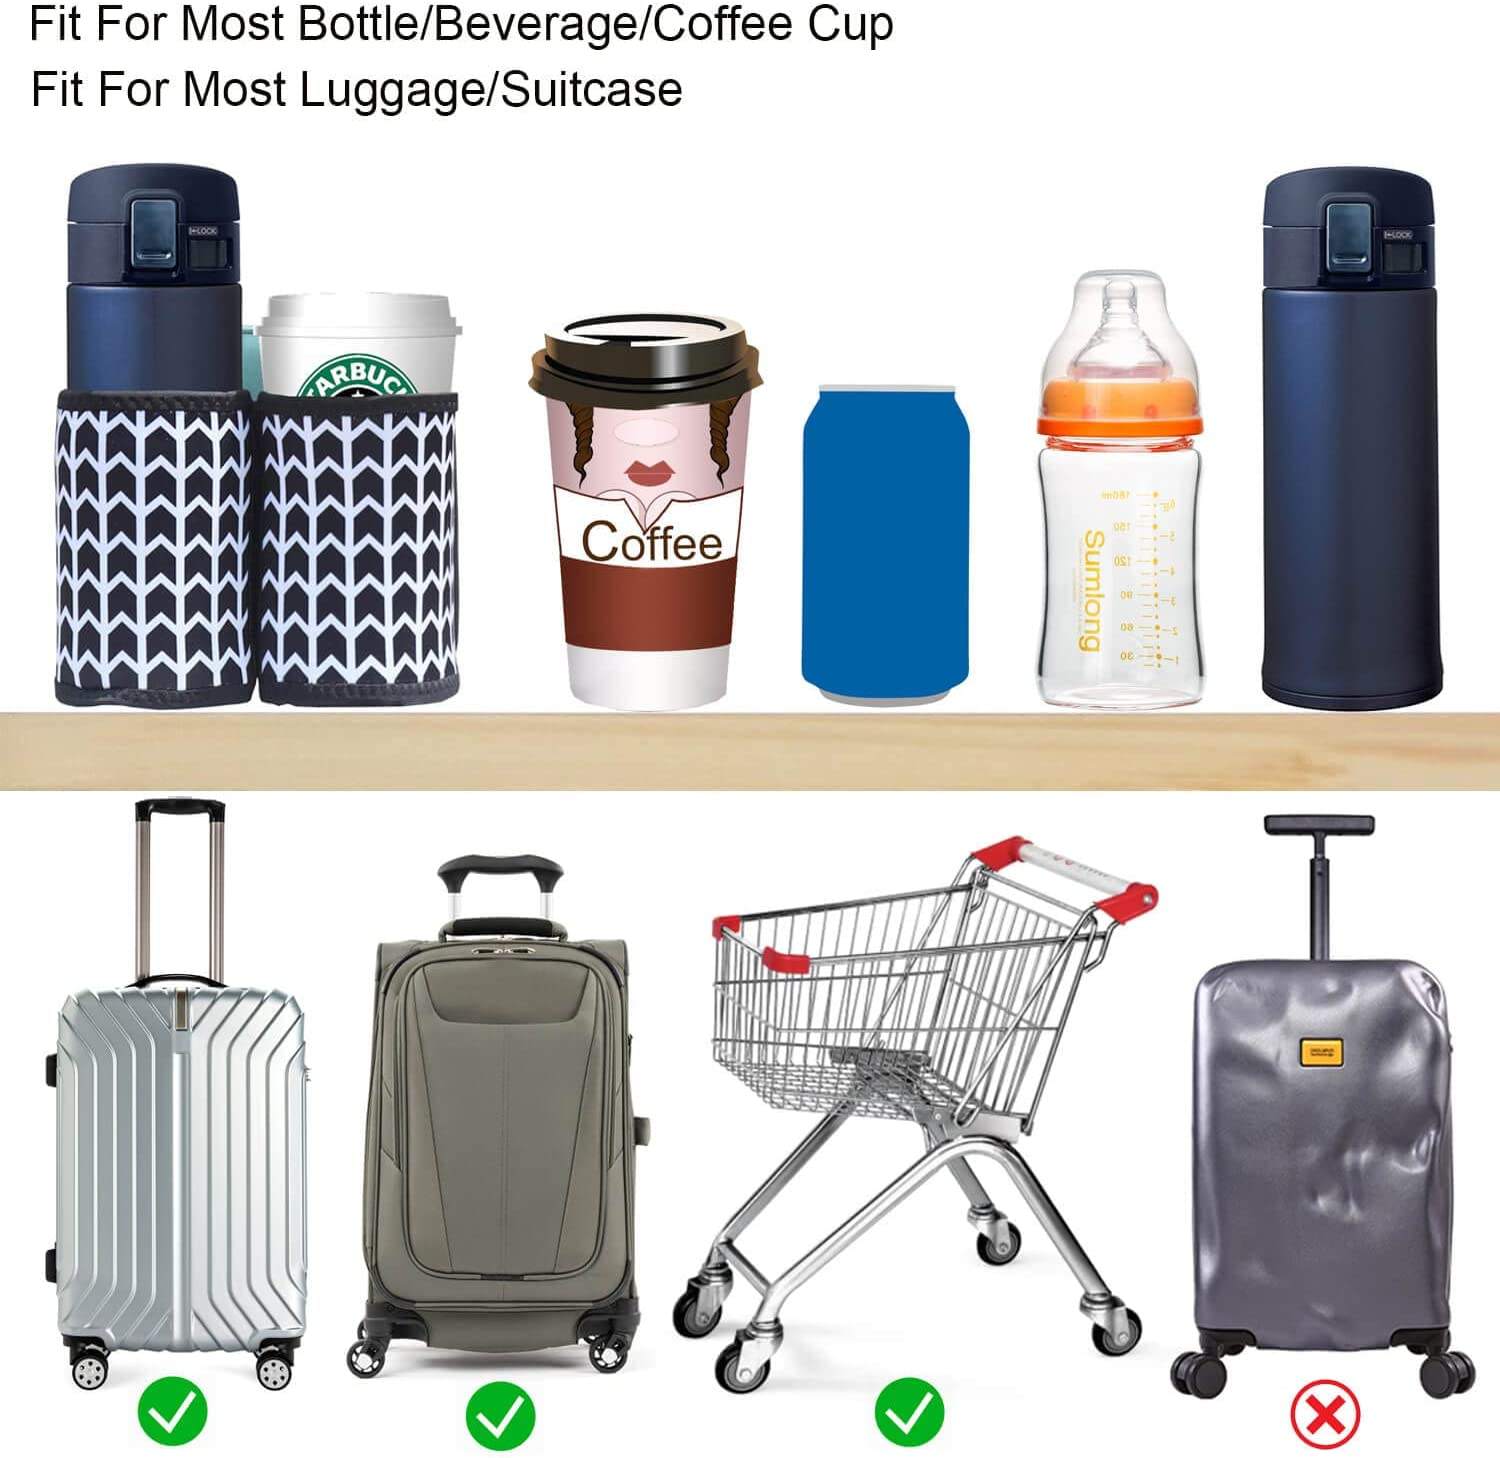 Drink Beverages Coffee With Backpack Fits All Suitcase Handles Luggage Travel Drink Bag Cup Holder